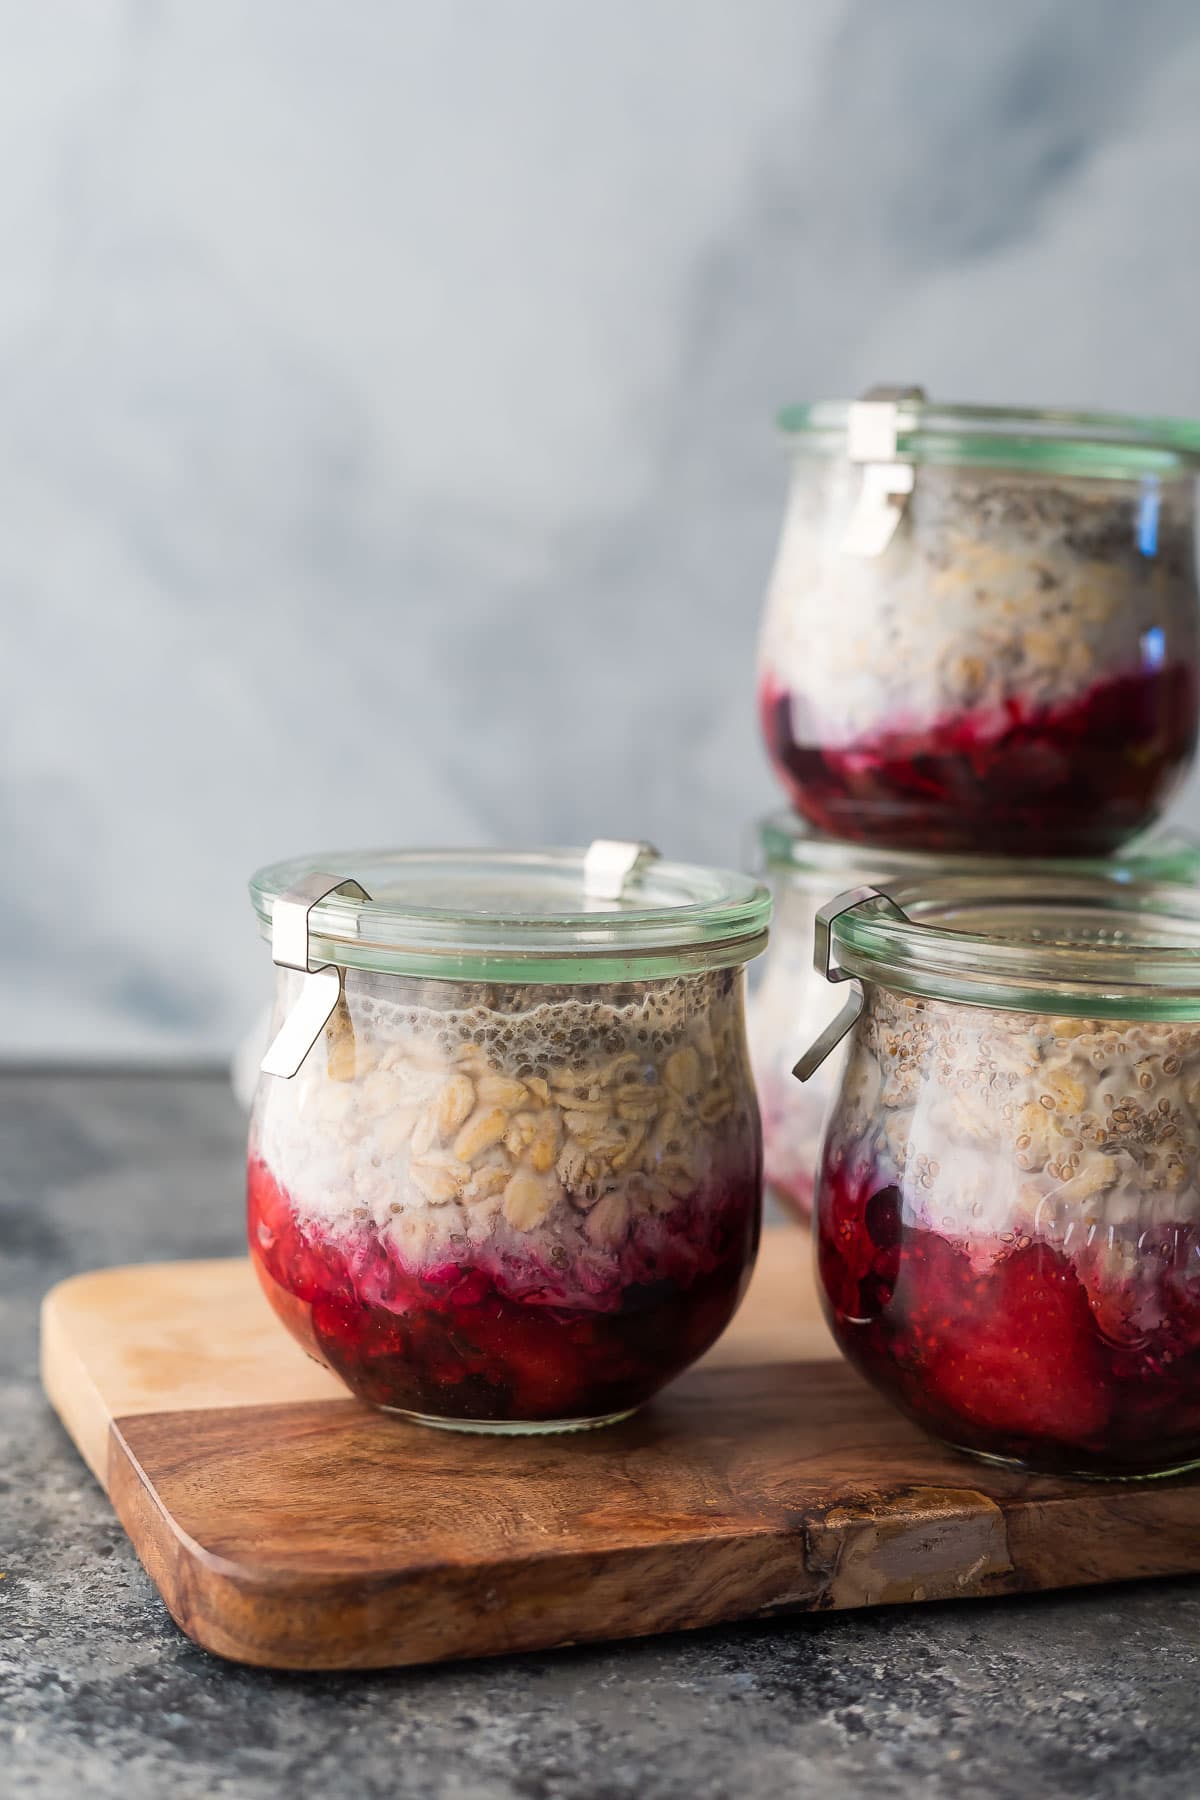 Best meal prep ideas for hot weather include overnight oats! Don't use the stove for oatmeal when the fridge can do the work.